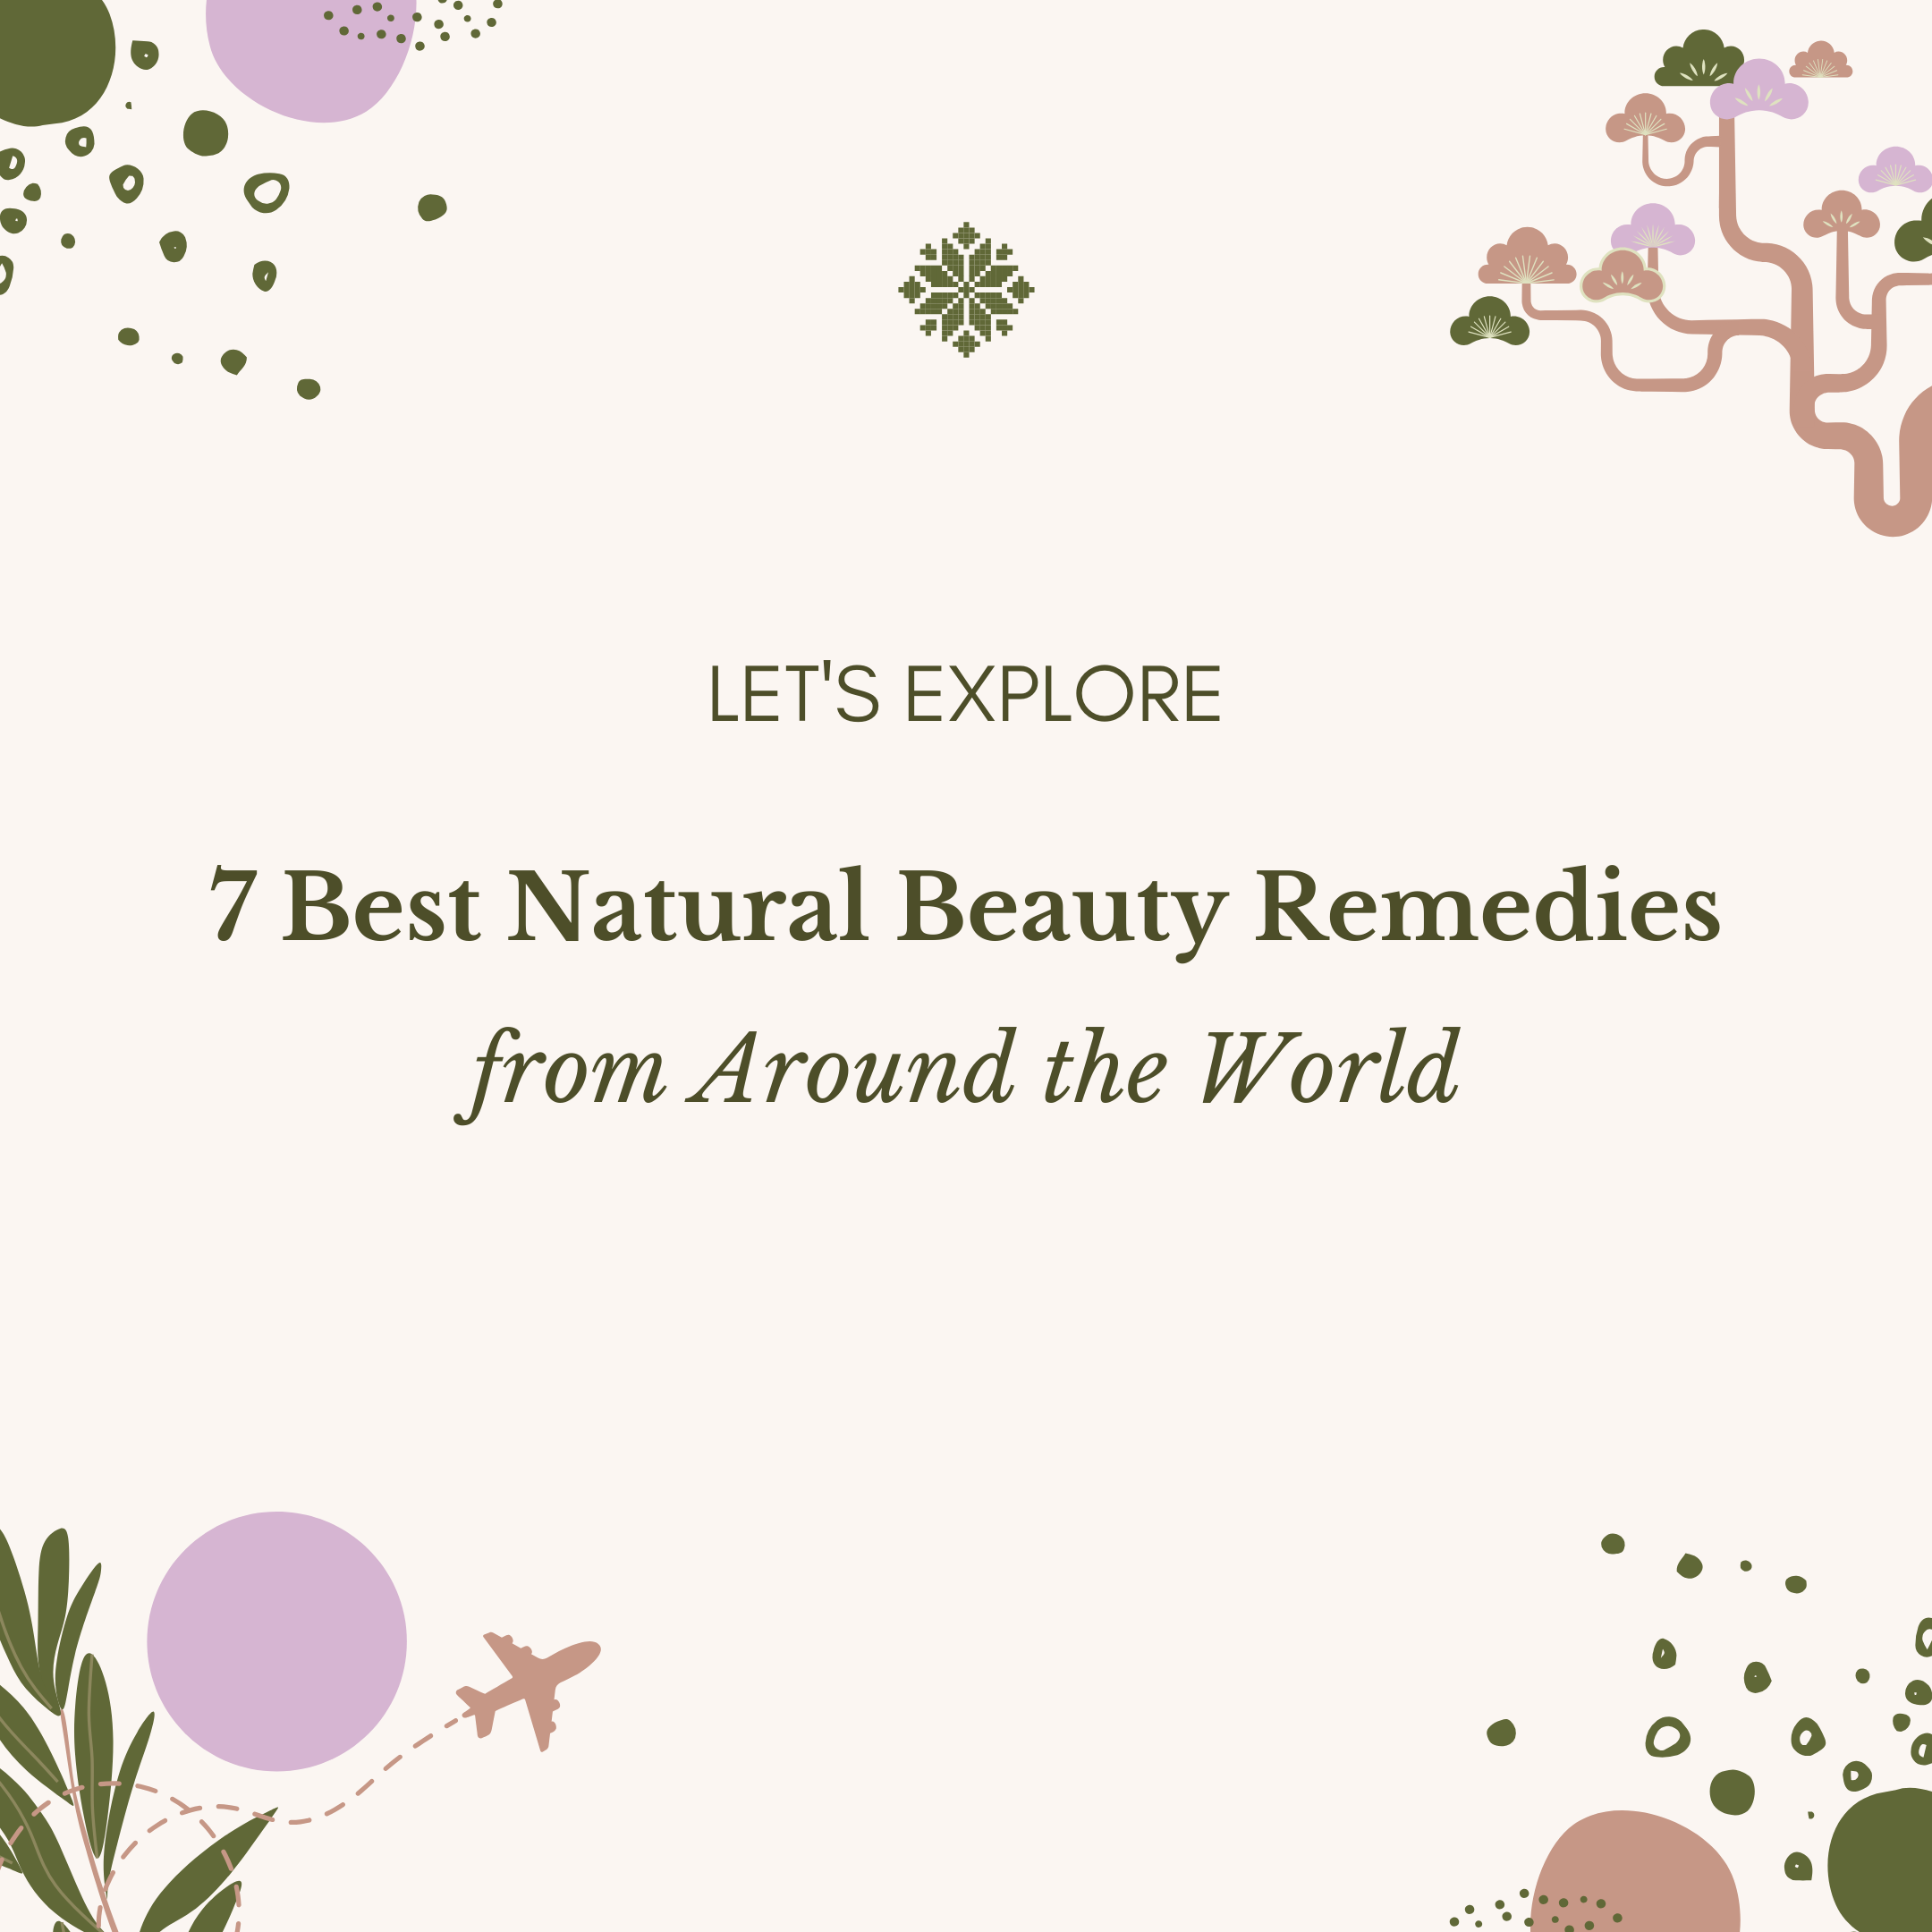 We’ve Found The 7 Best Natural Beauty Remedies from Around the World